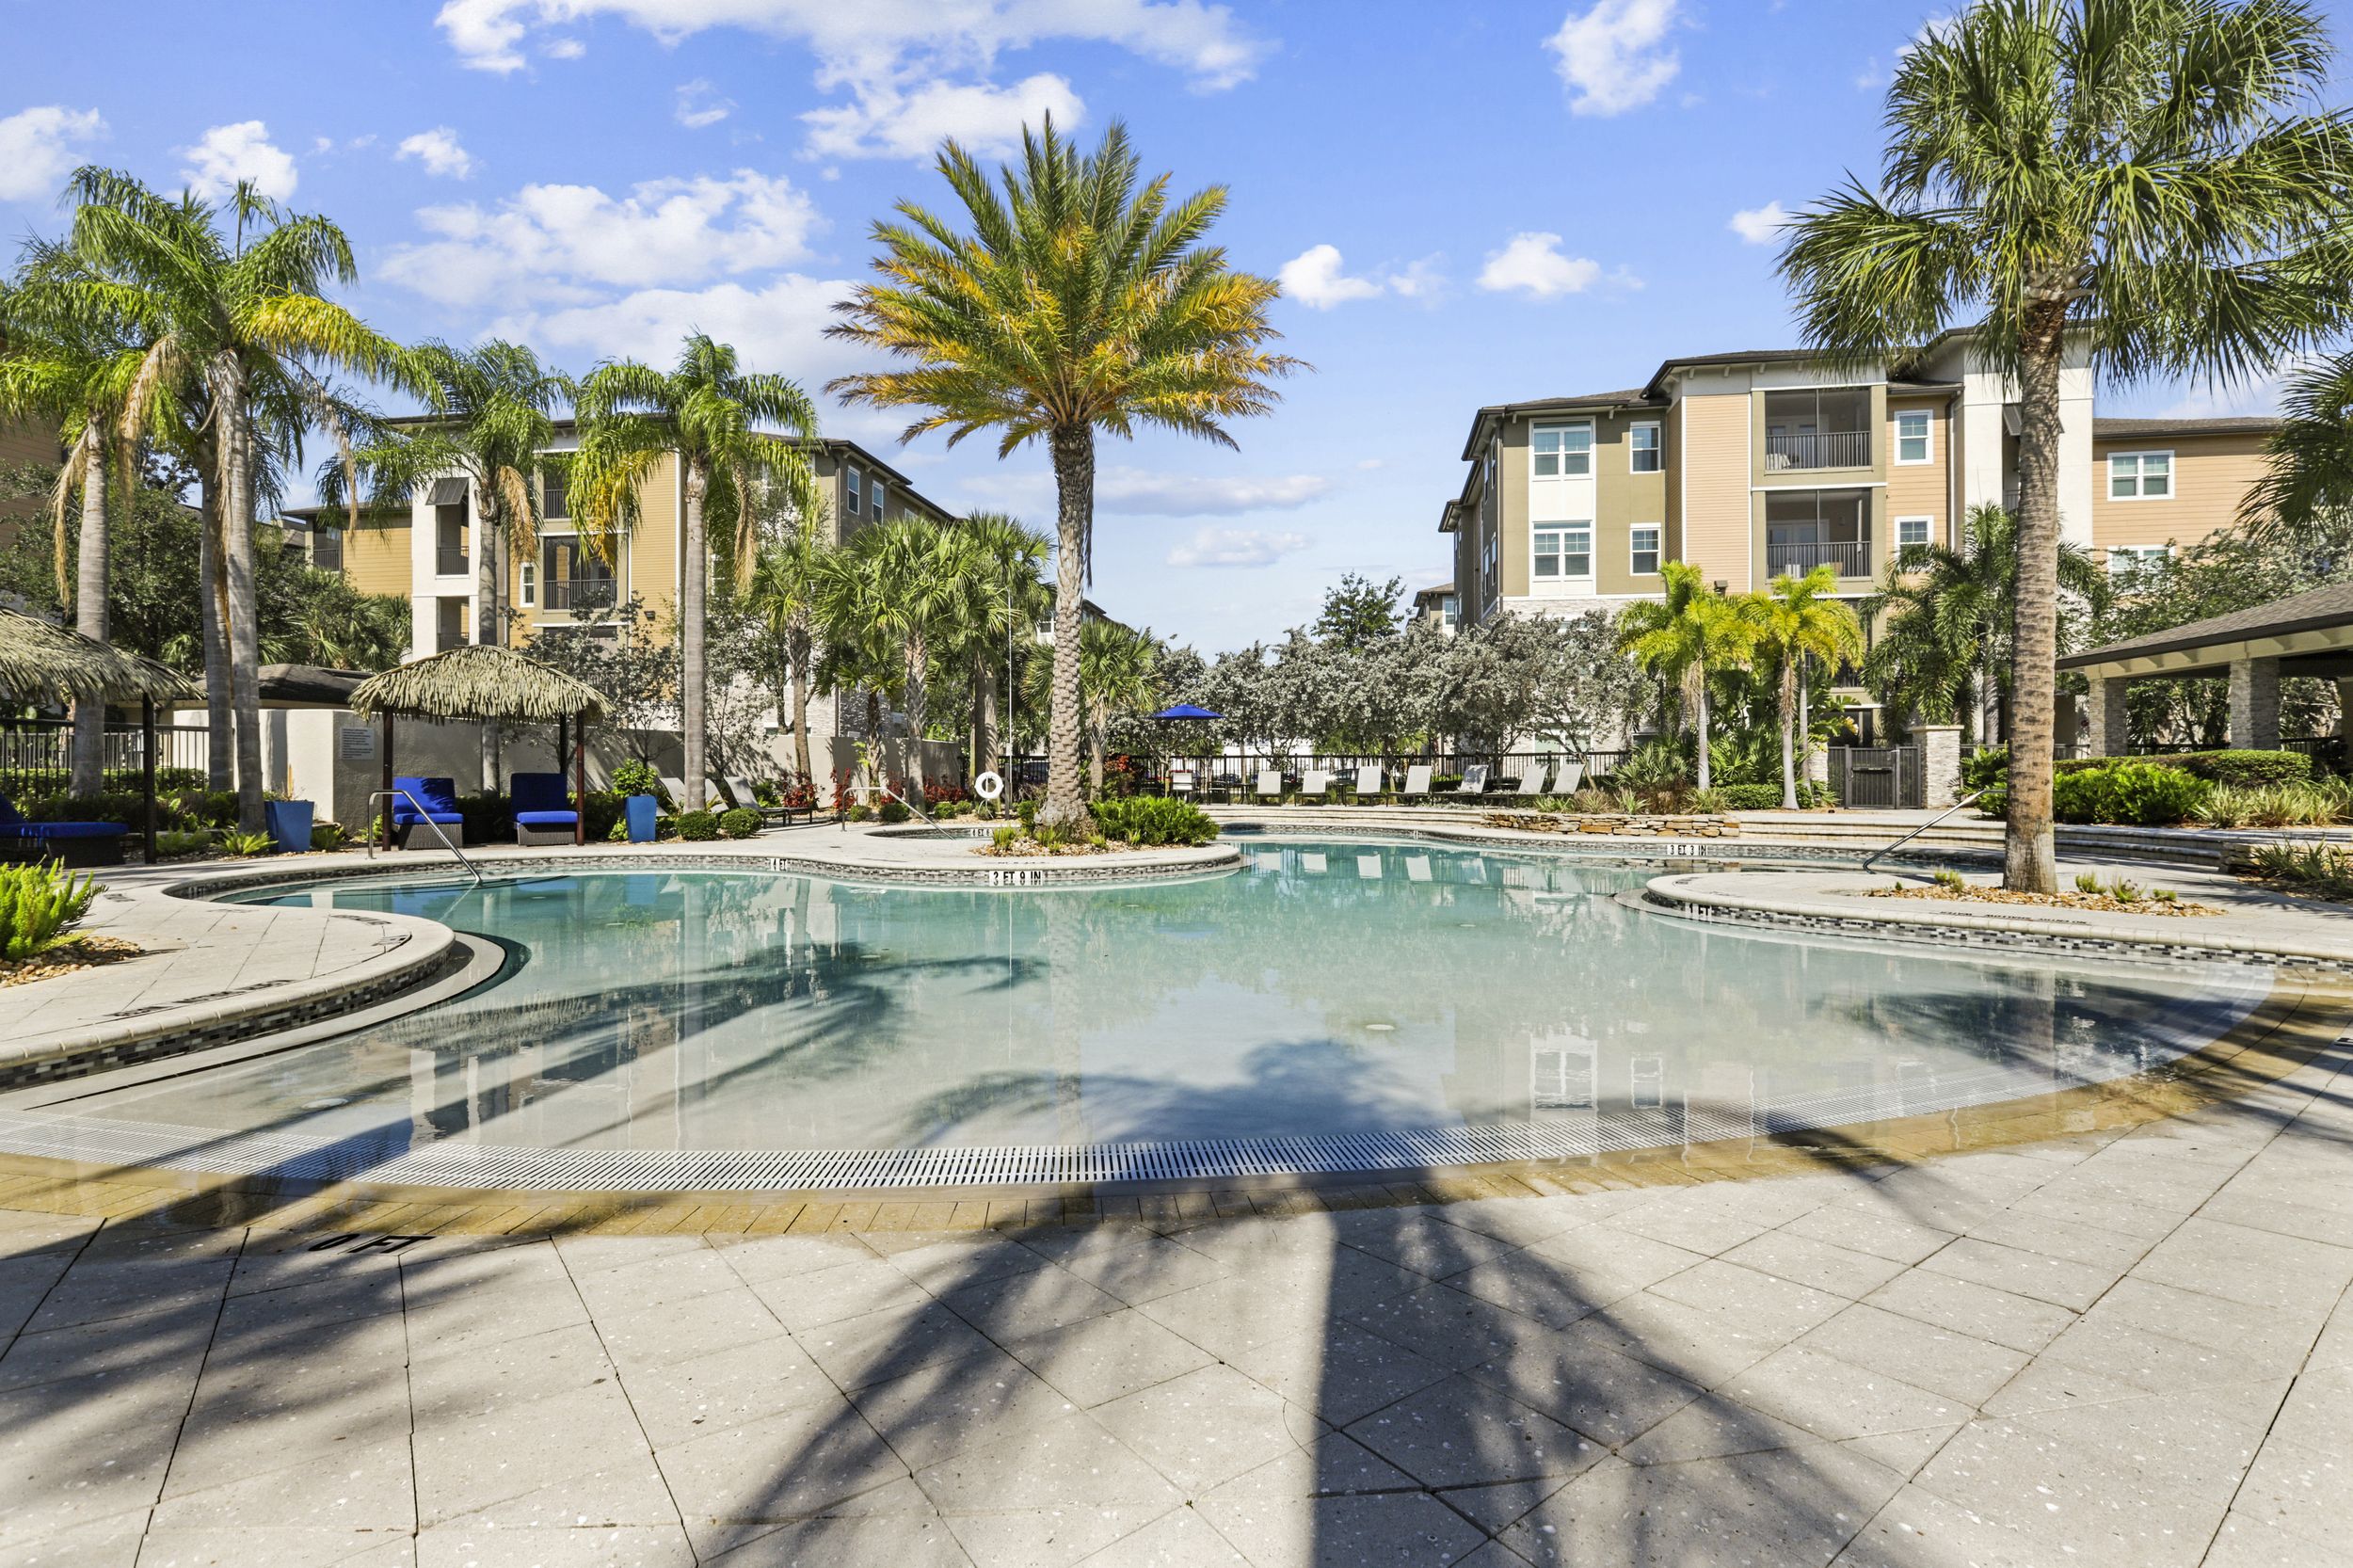 Resort-style pool with sundeck, palm trees, and lounge chairs at Lantower Brandon Crossroads.